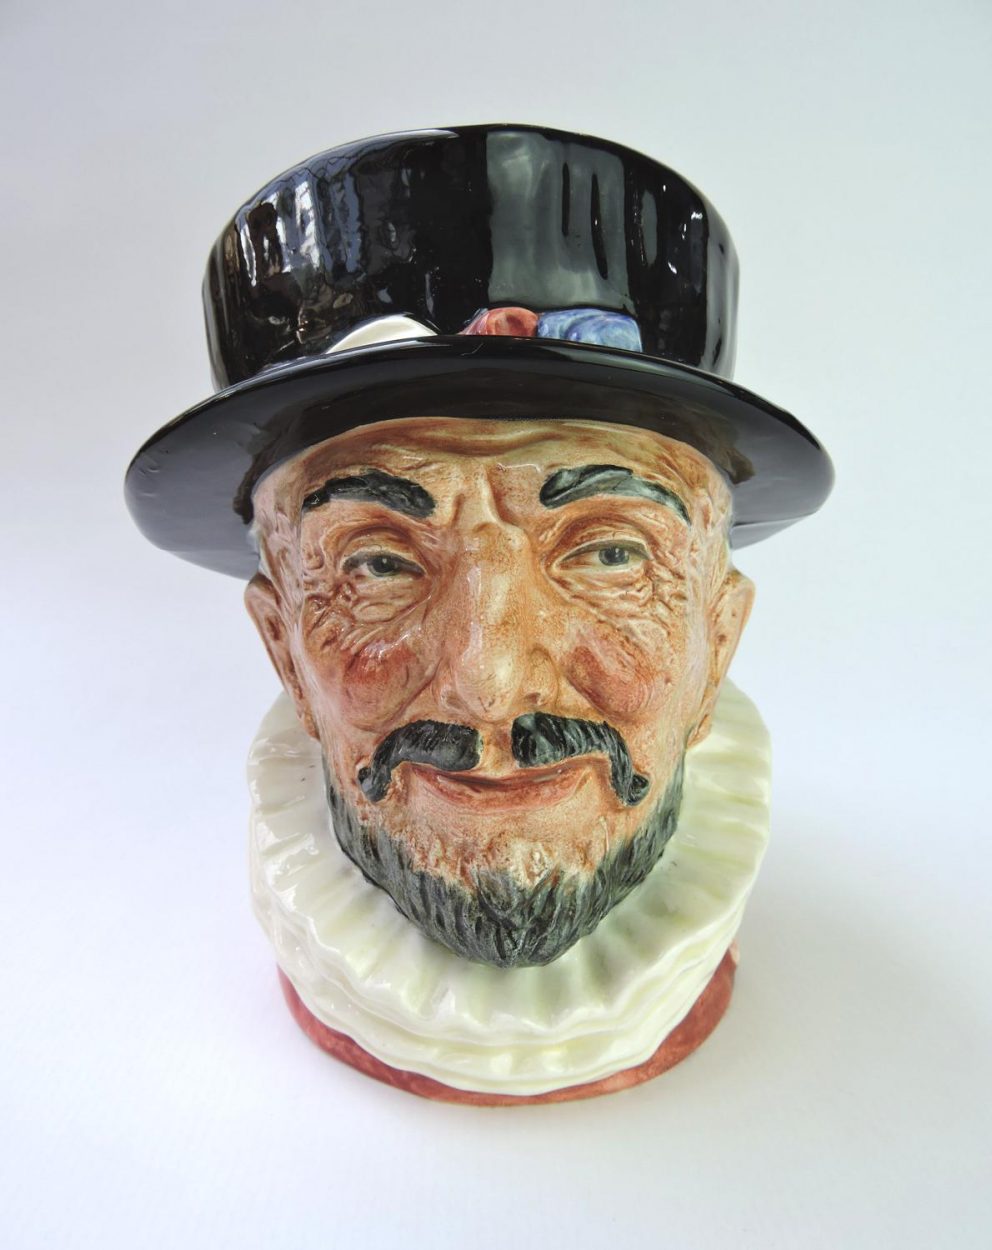 RD Small 0036 Beefeater ER D6233 Beefeater Royal Doulton Character Jug 